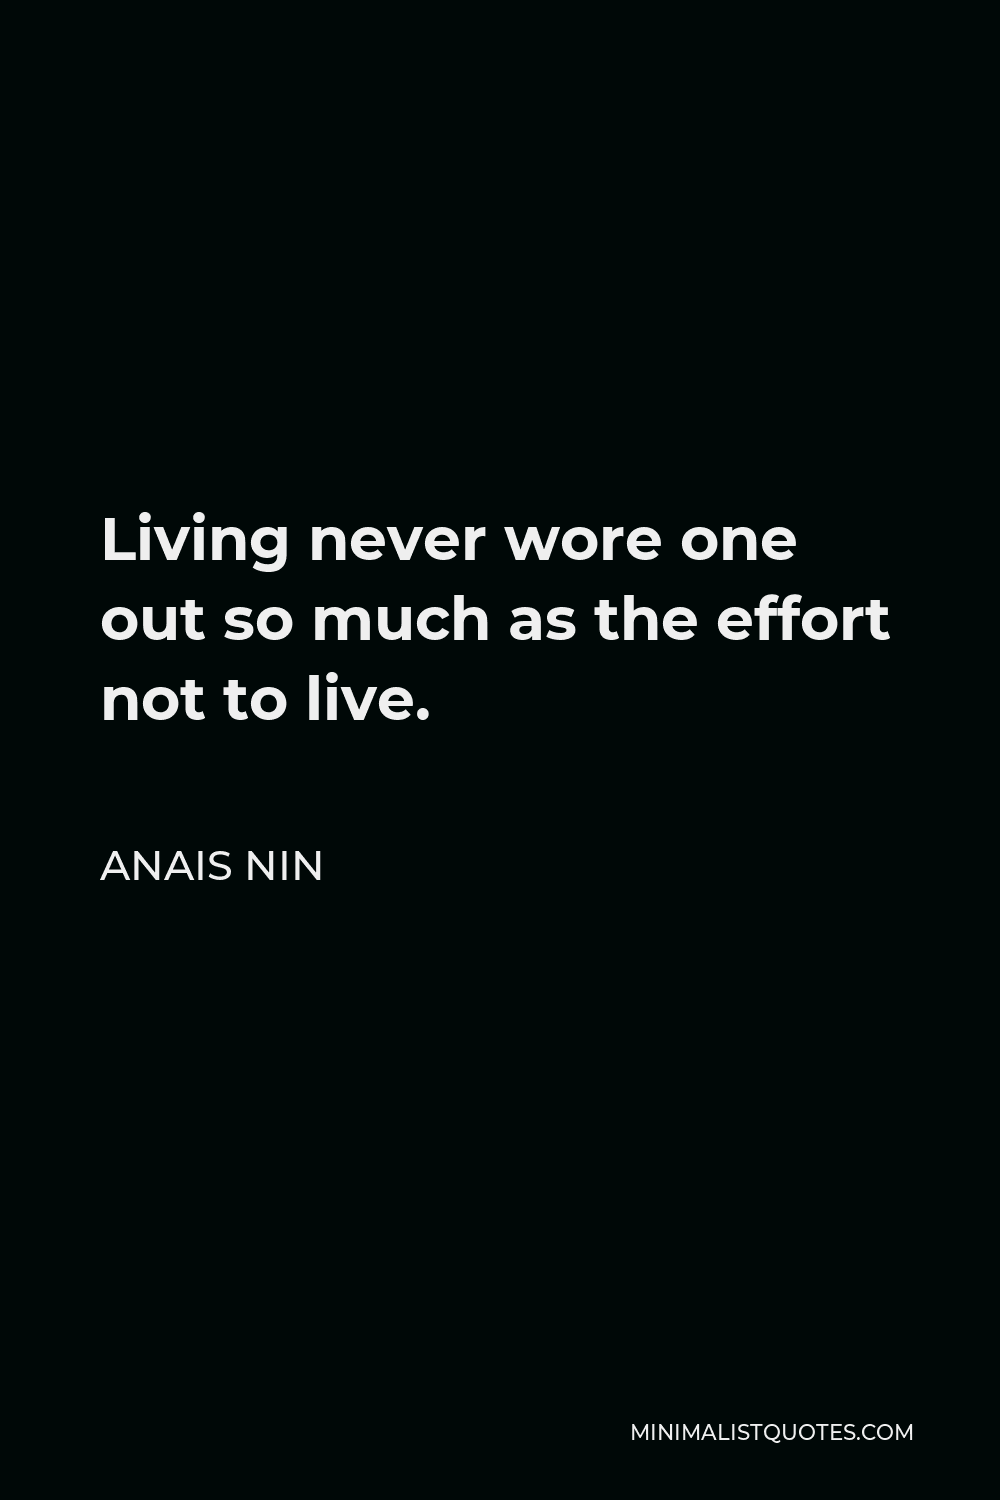 Anais Nin Quote - Living never wore one out so much as the effort not to live.